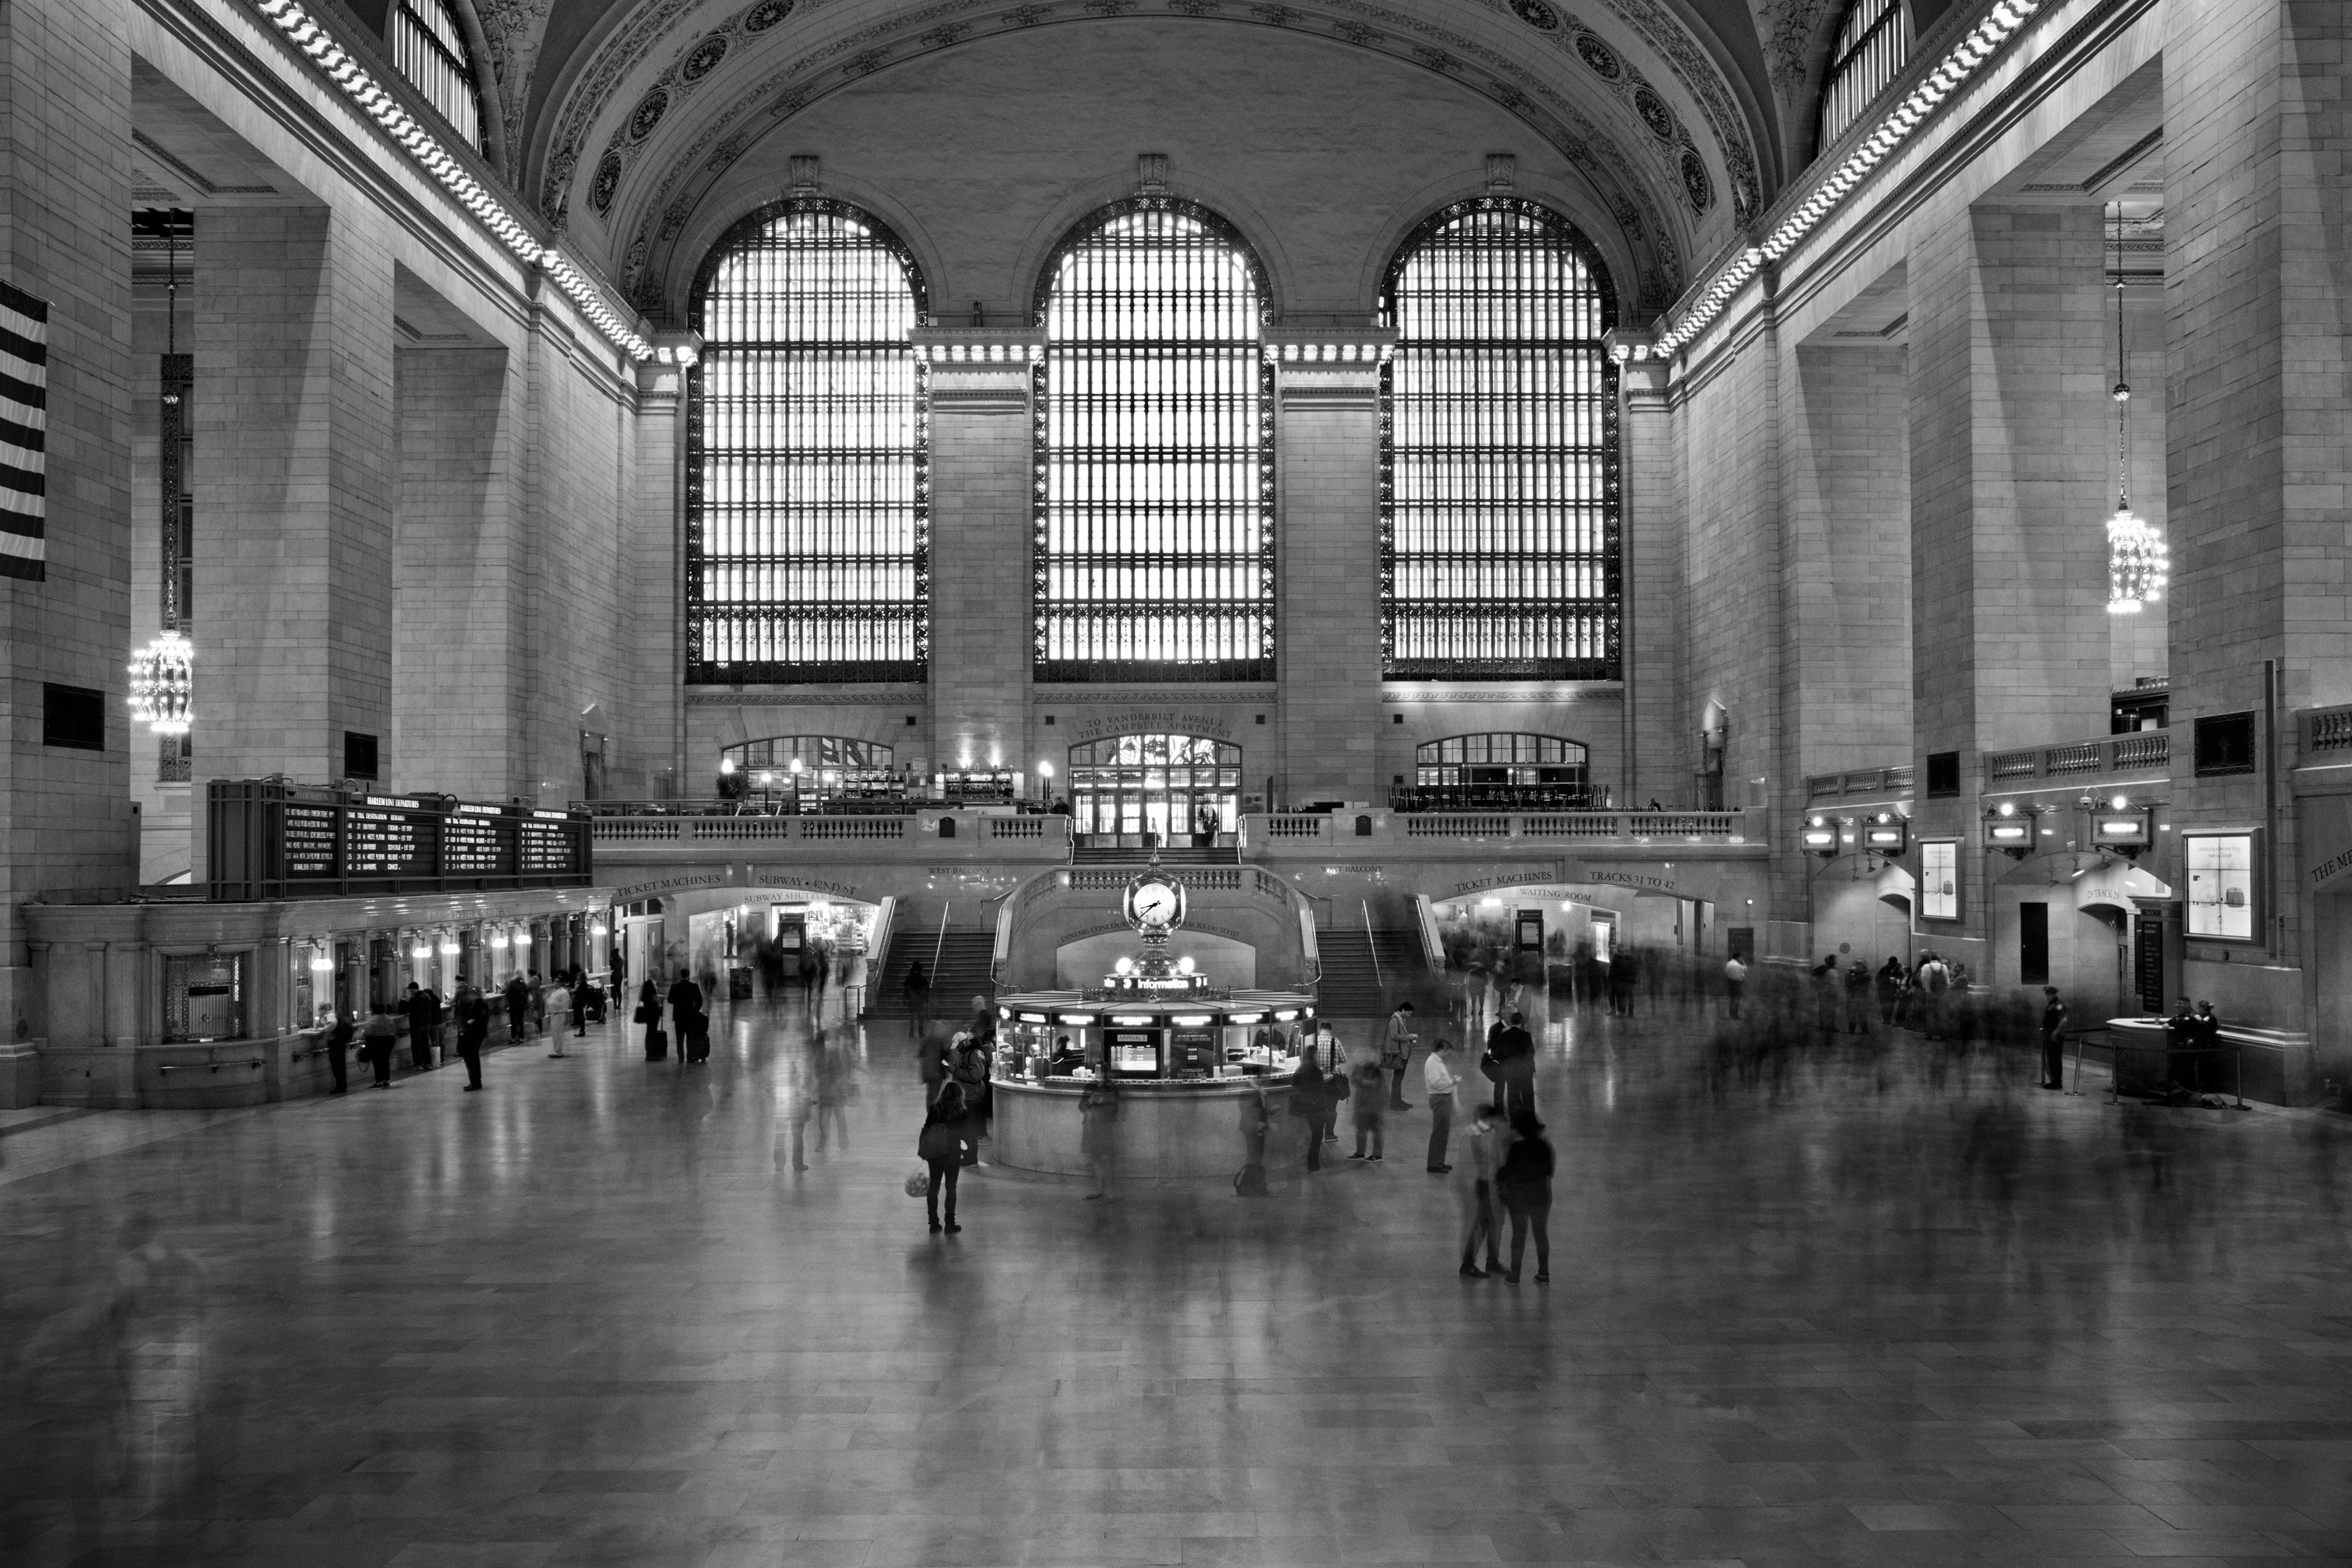 Main Concourse at Grand Central Terminal